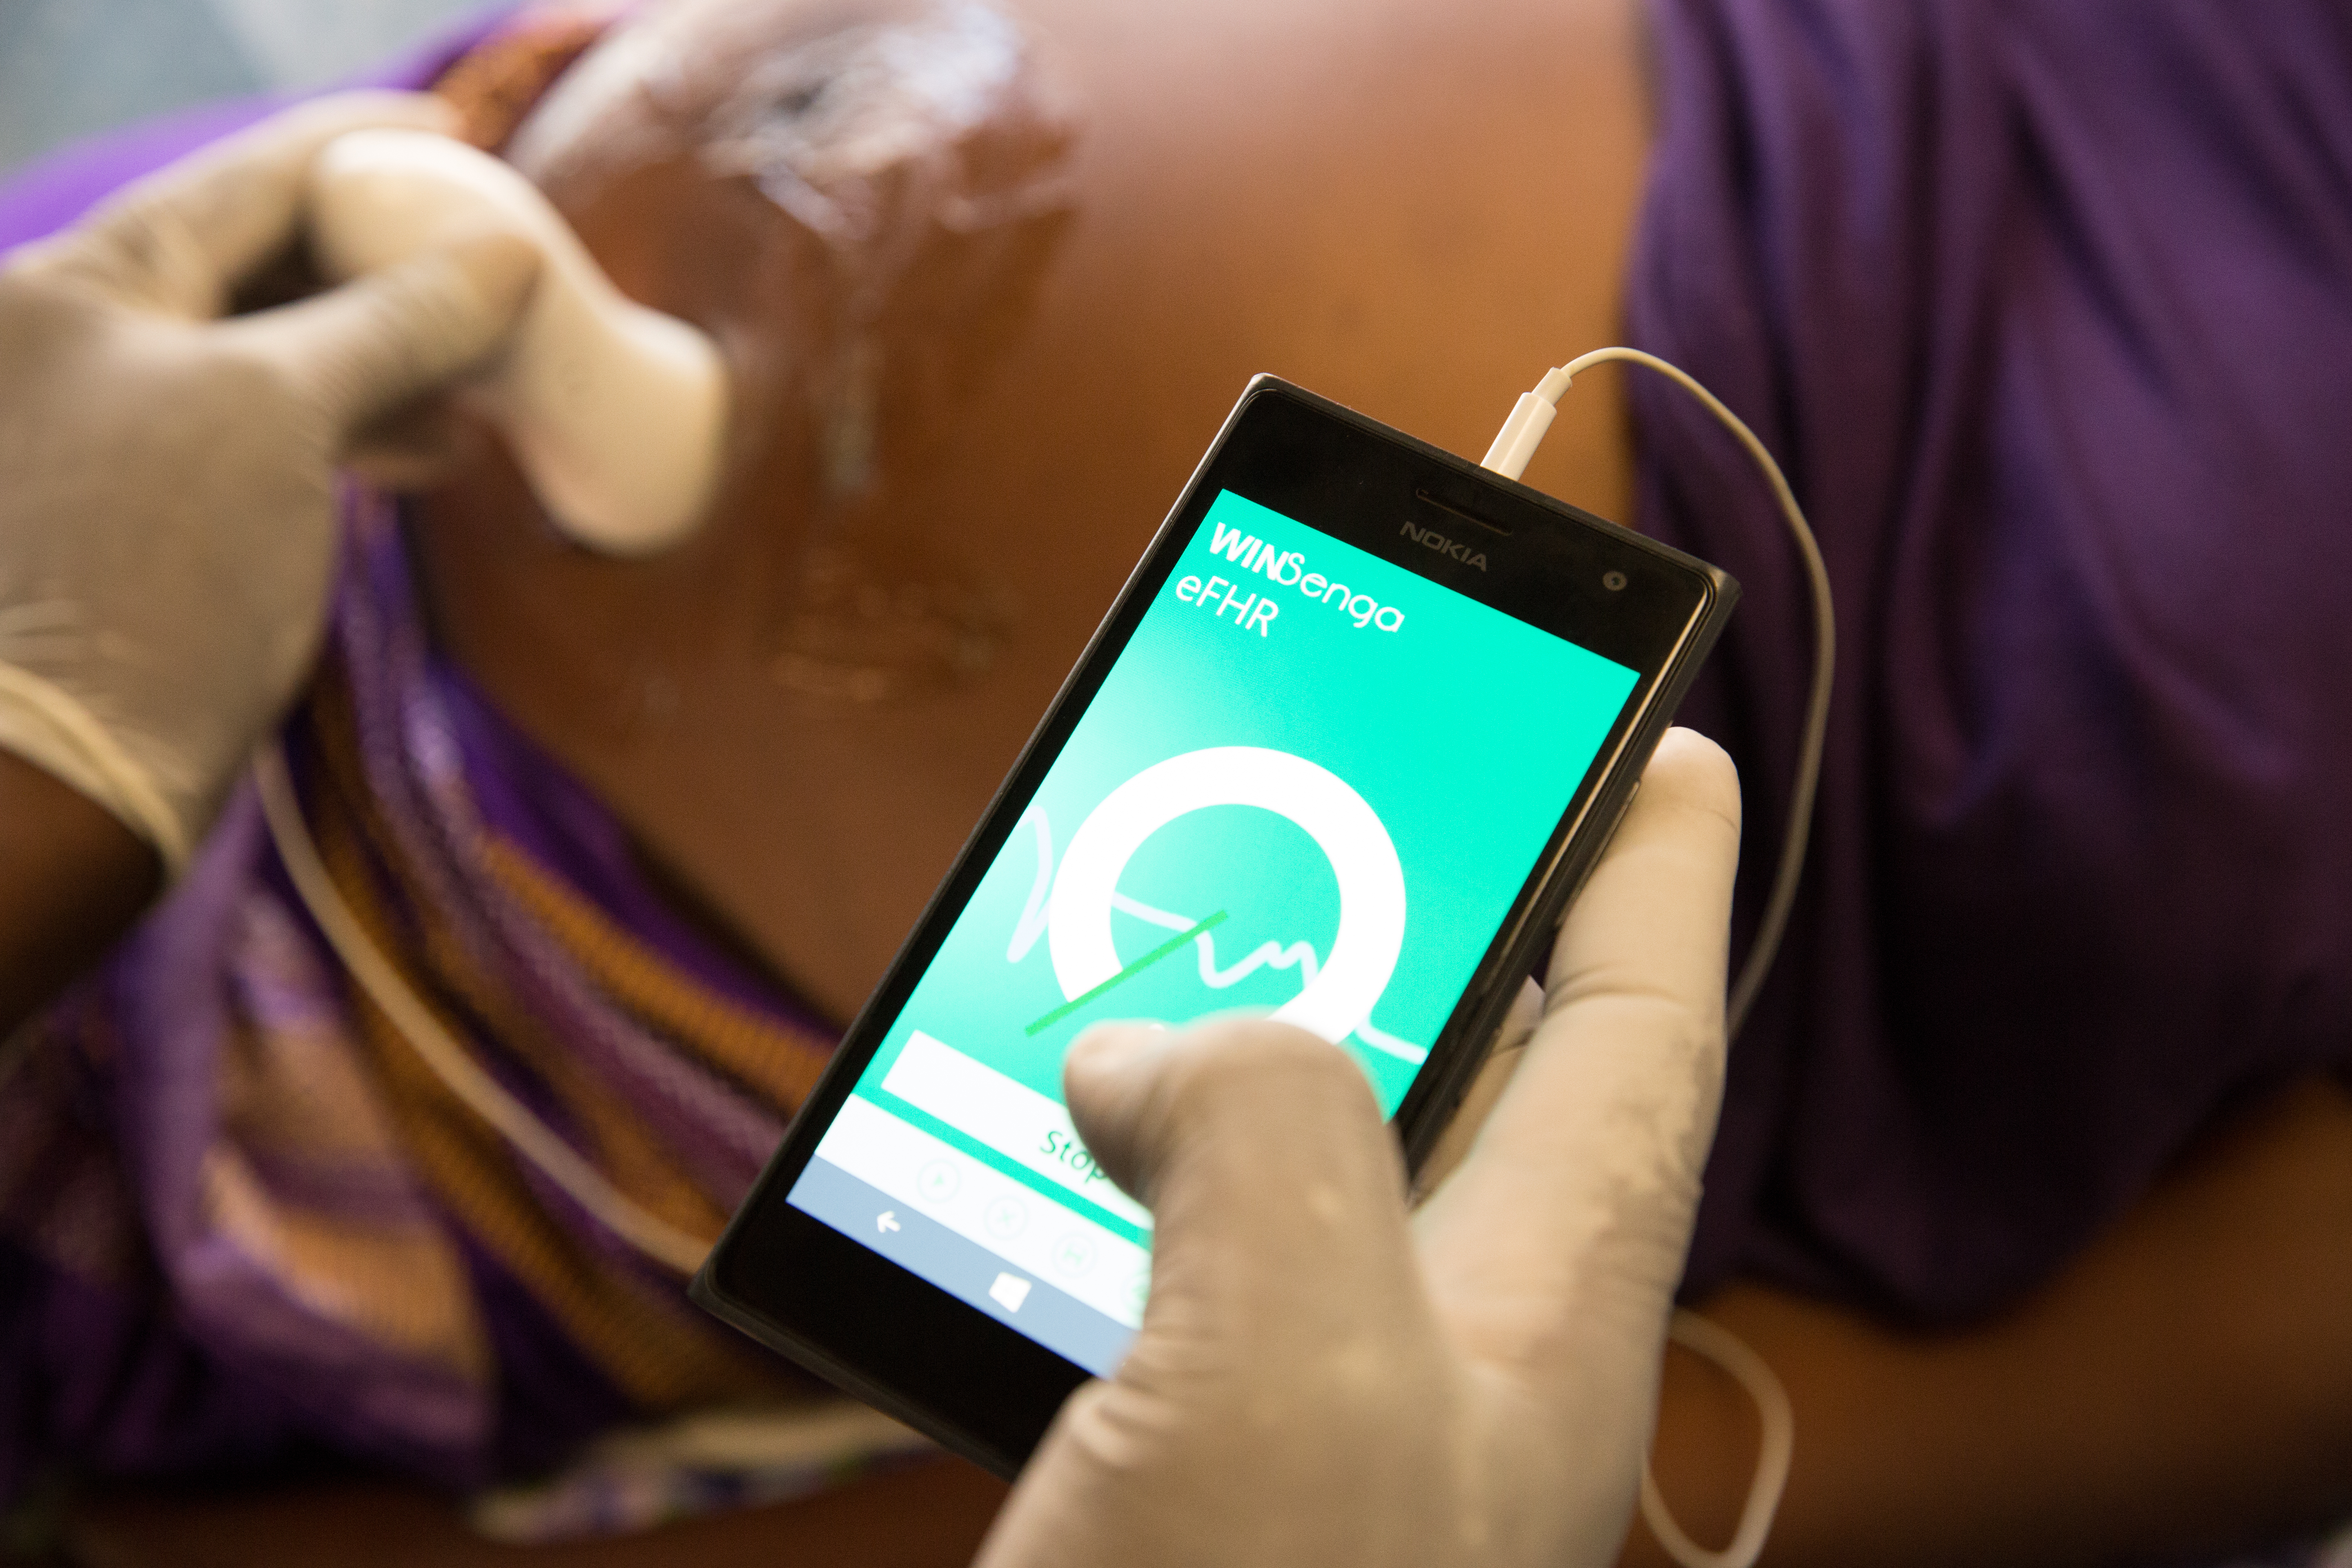 WinSenga is a low-cost, smartphone-based ultrasound alternative that plugs into a mobile phone and is operated using an app.